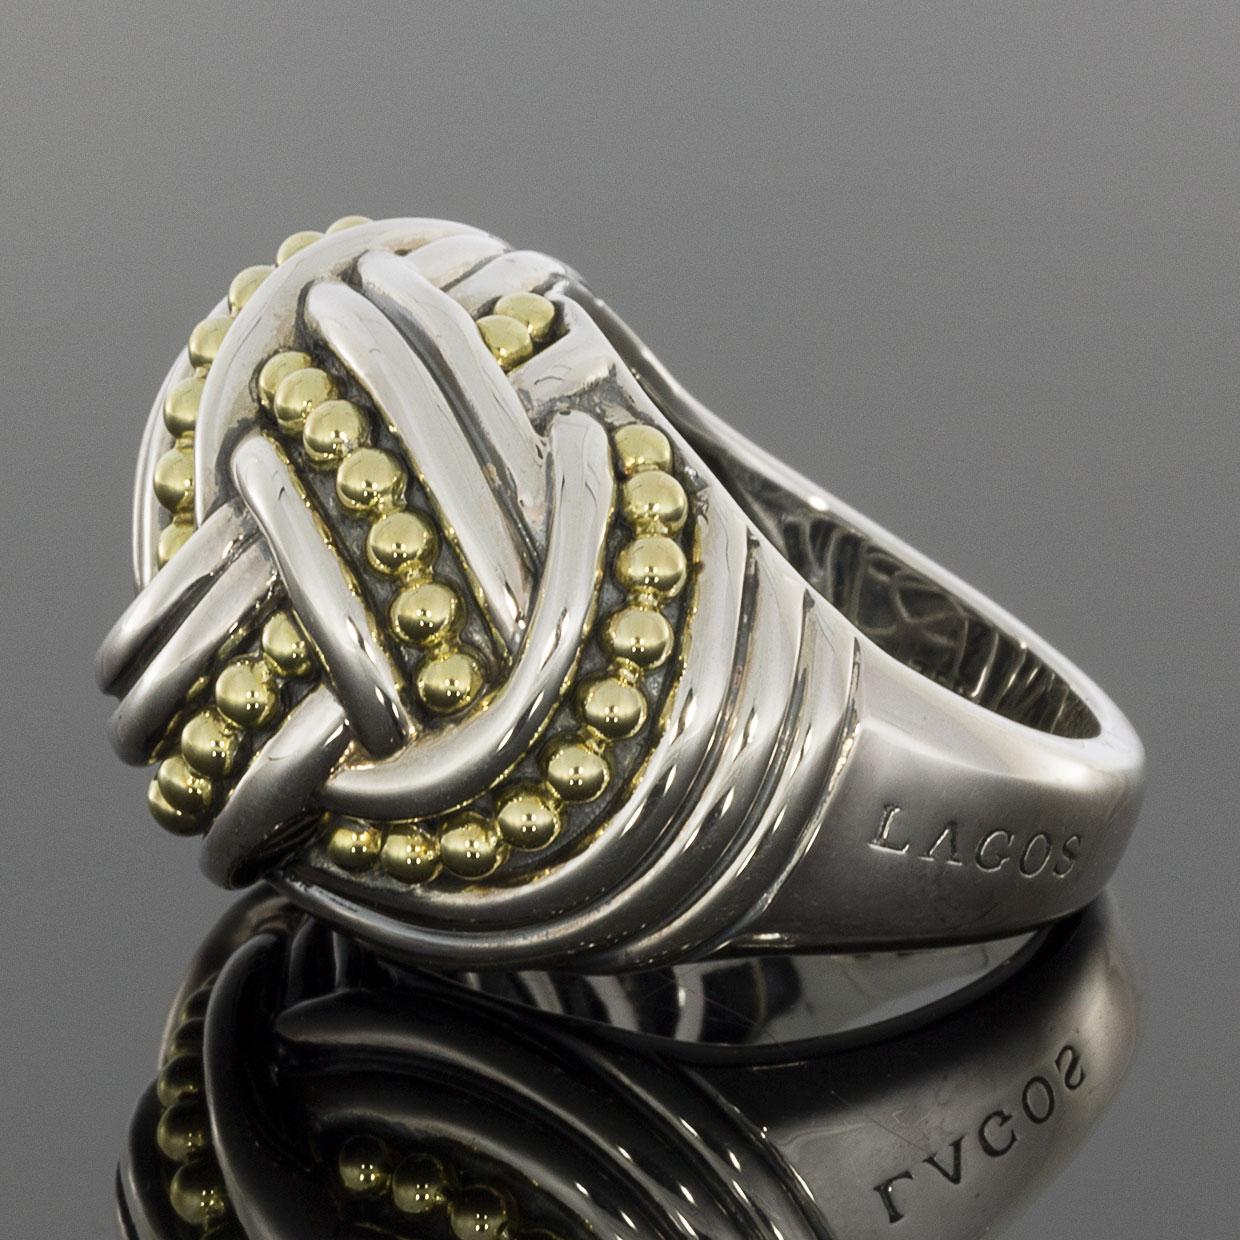 Item Details
Estimated Retail $750.00
Brand Lagos
Collection Torsade
Metal Mixed Metals
Ring Size 7.00
Sizable Limited
Width 18.30mm
Metal Purity 18k
Finish Polished
Style Dome

In 1977, LAGOS was founded by artist & master jeweler Stephen Lagos.